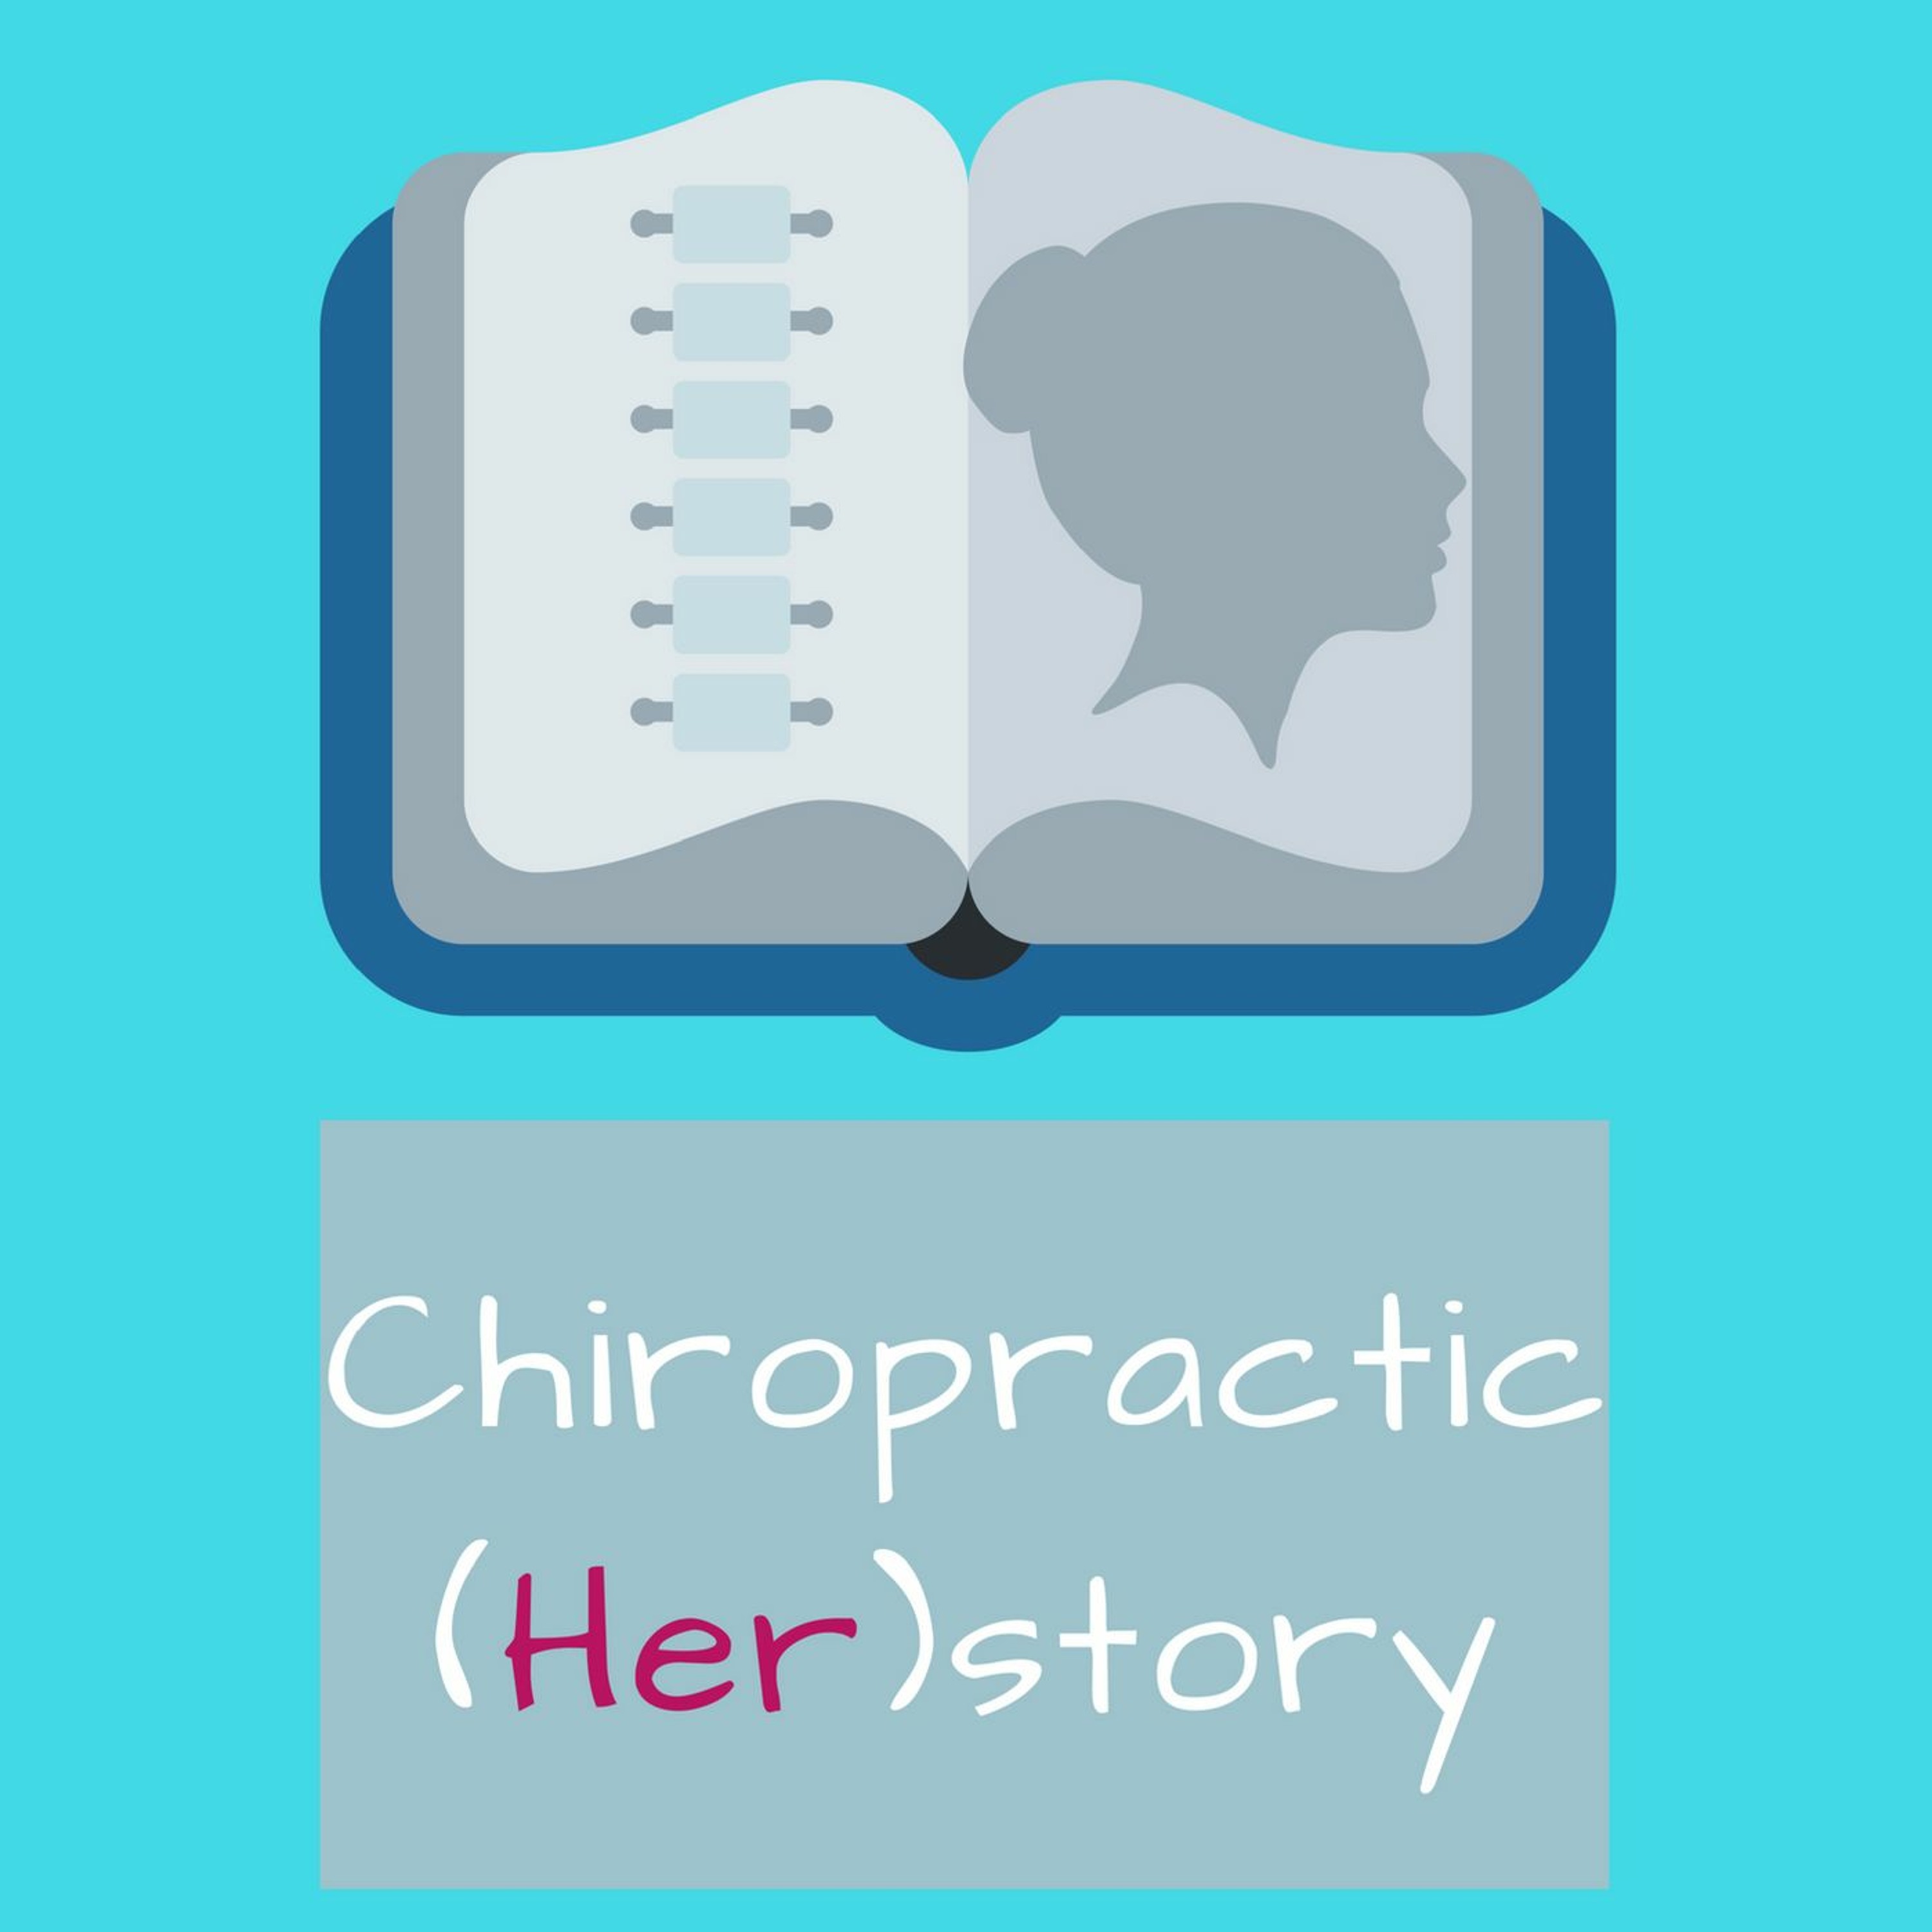 Dr. Jenifer Epstein- Chiropractic (Her)story Episode 53